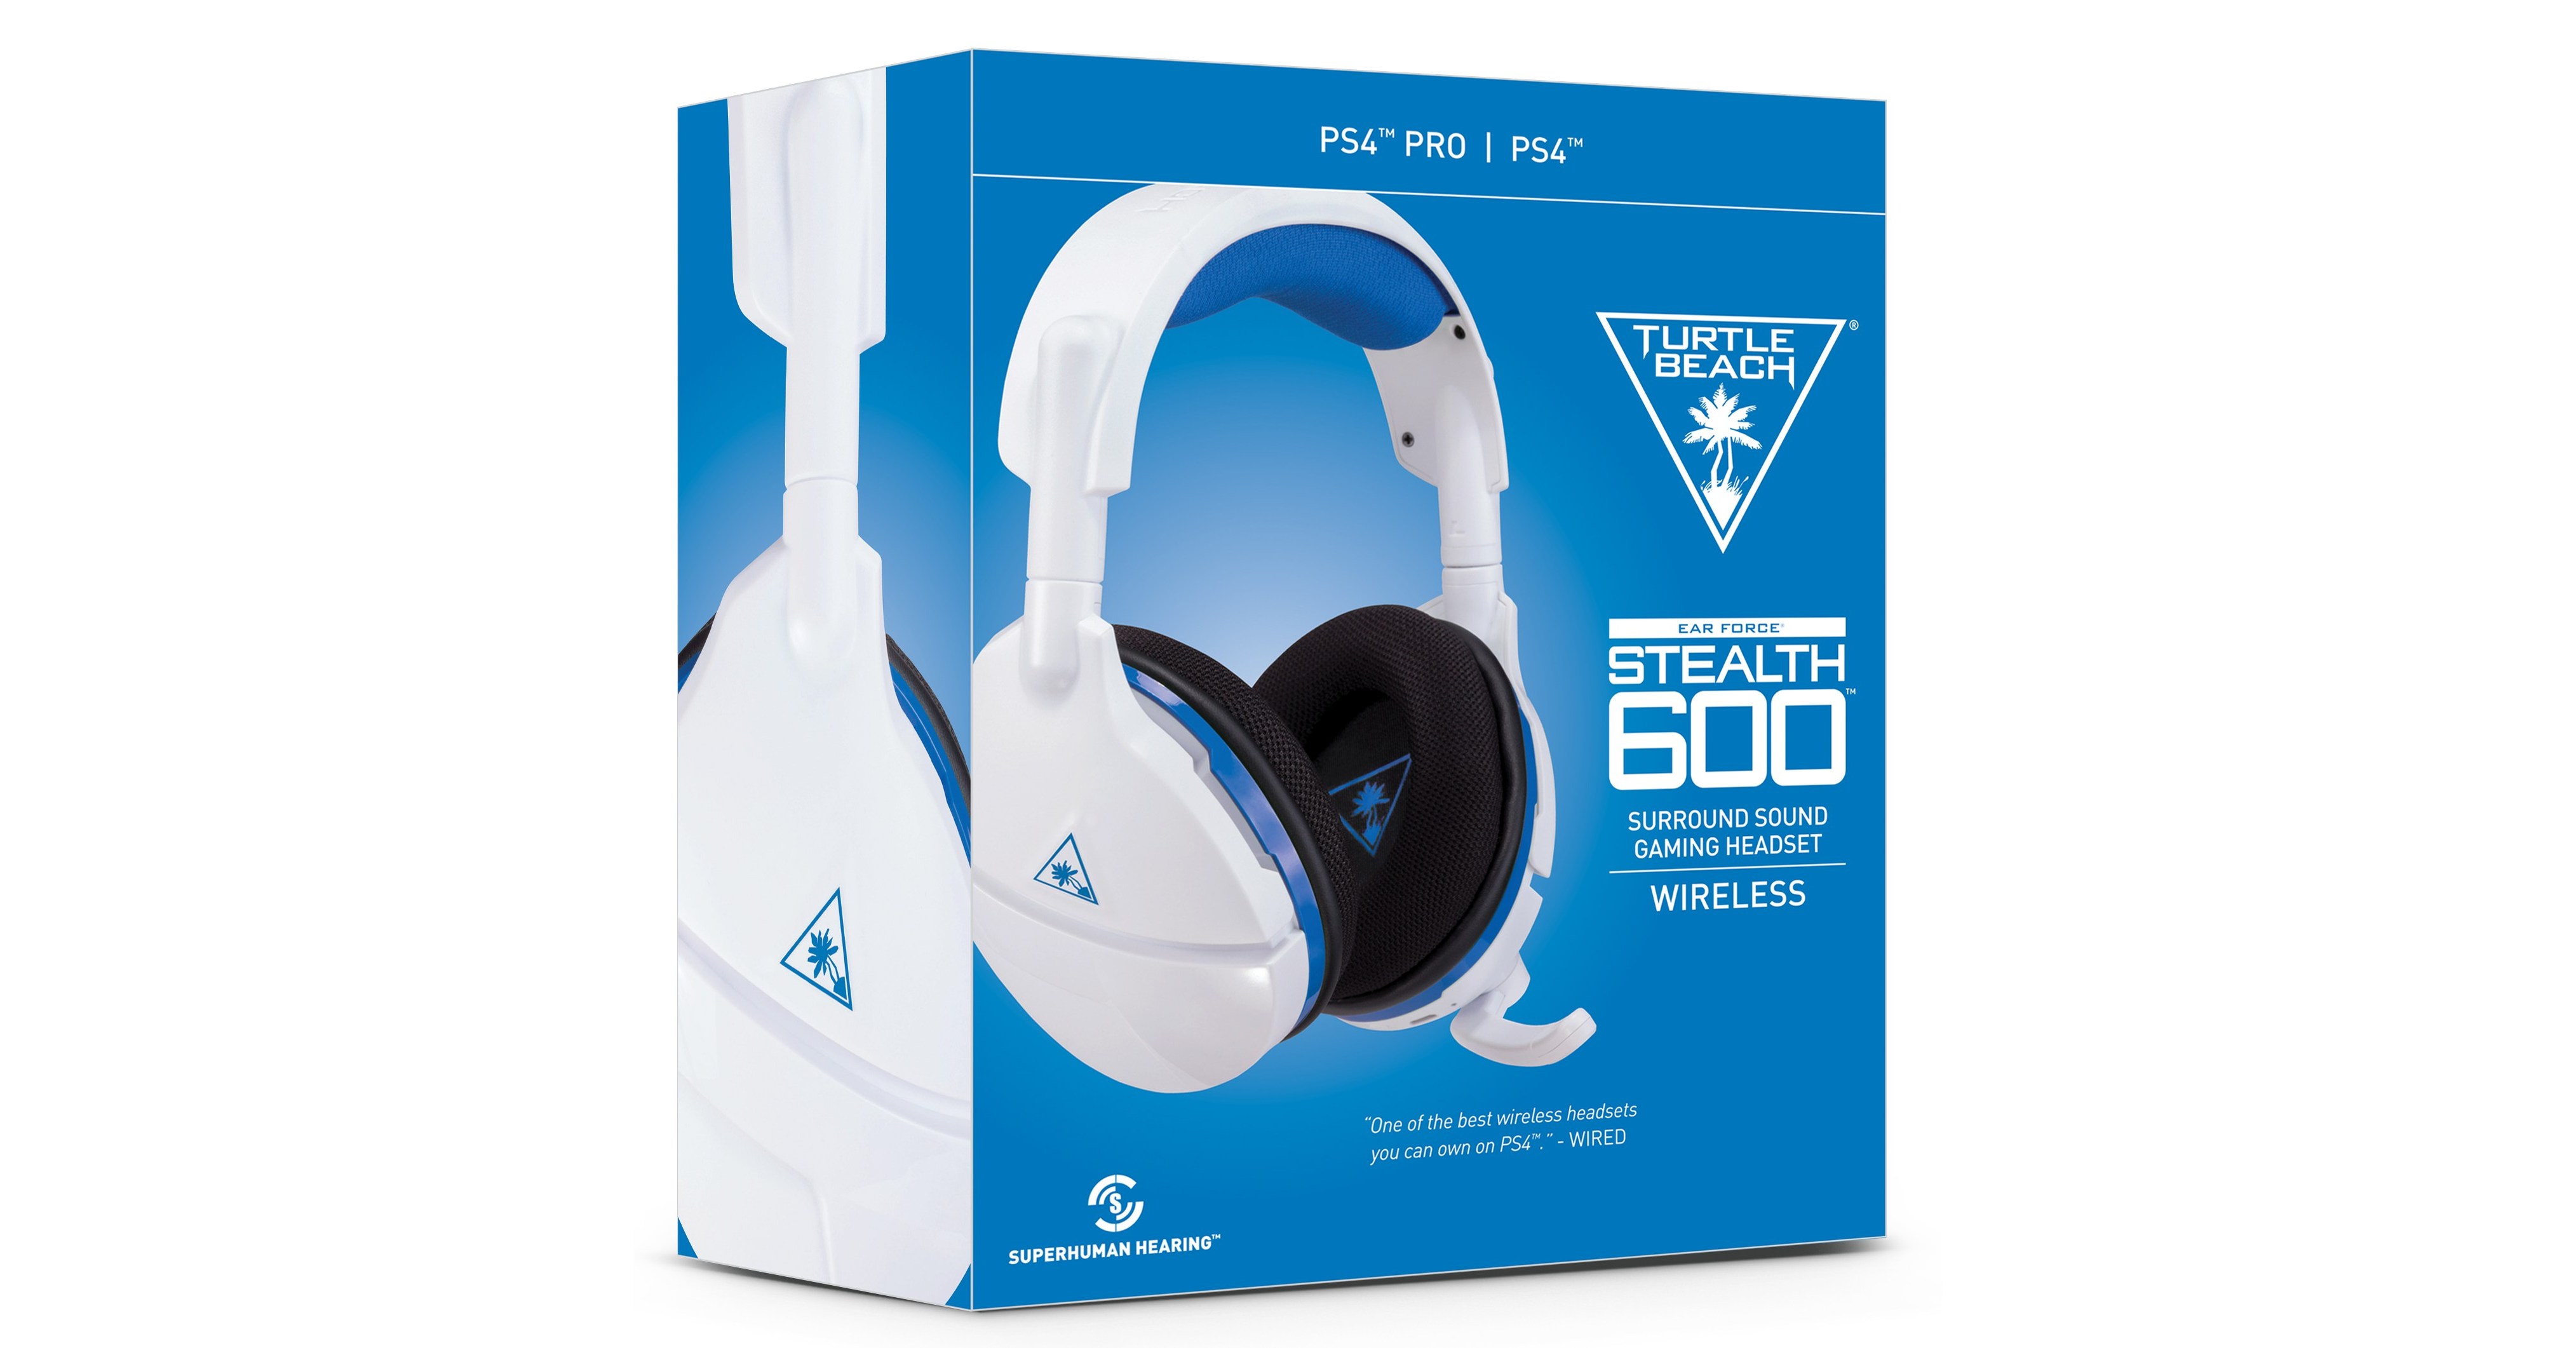 Harmonie Populair Cumulatief Turtle Beach's Best-Selling Stealth 600 Gaming Headset For Xbox One And  PlayStation 4 Gets A New White Colorway For The Holidays